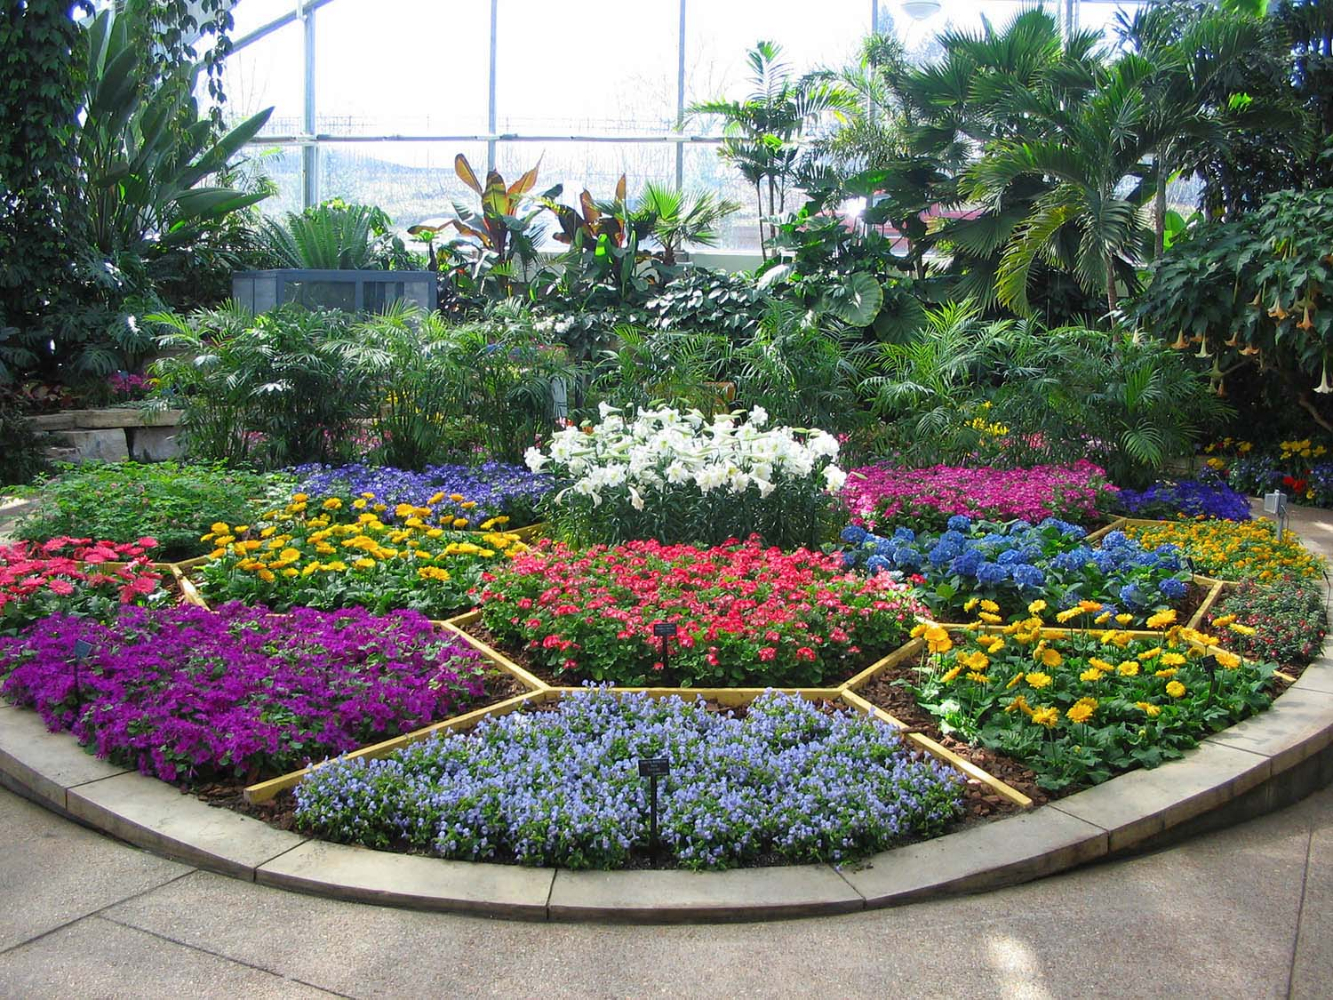 Conservatory complex with brightly colored flowers in the center display area.